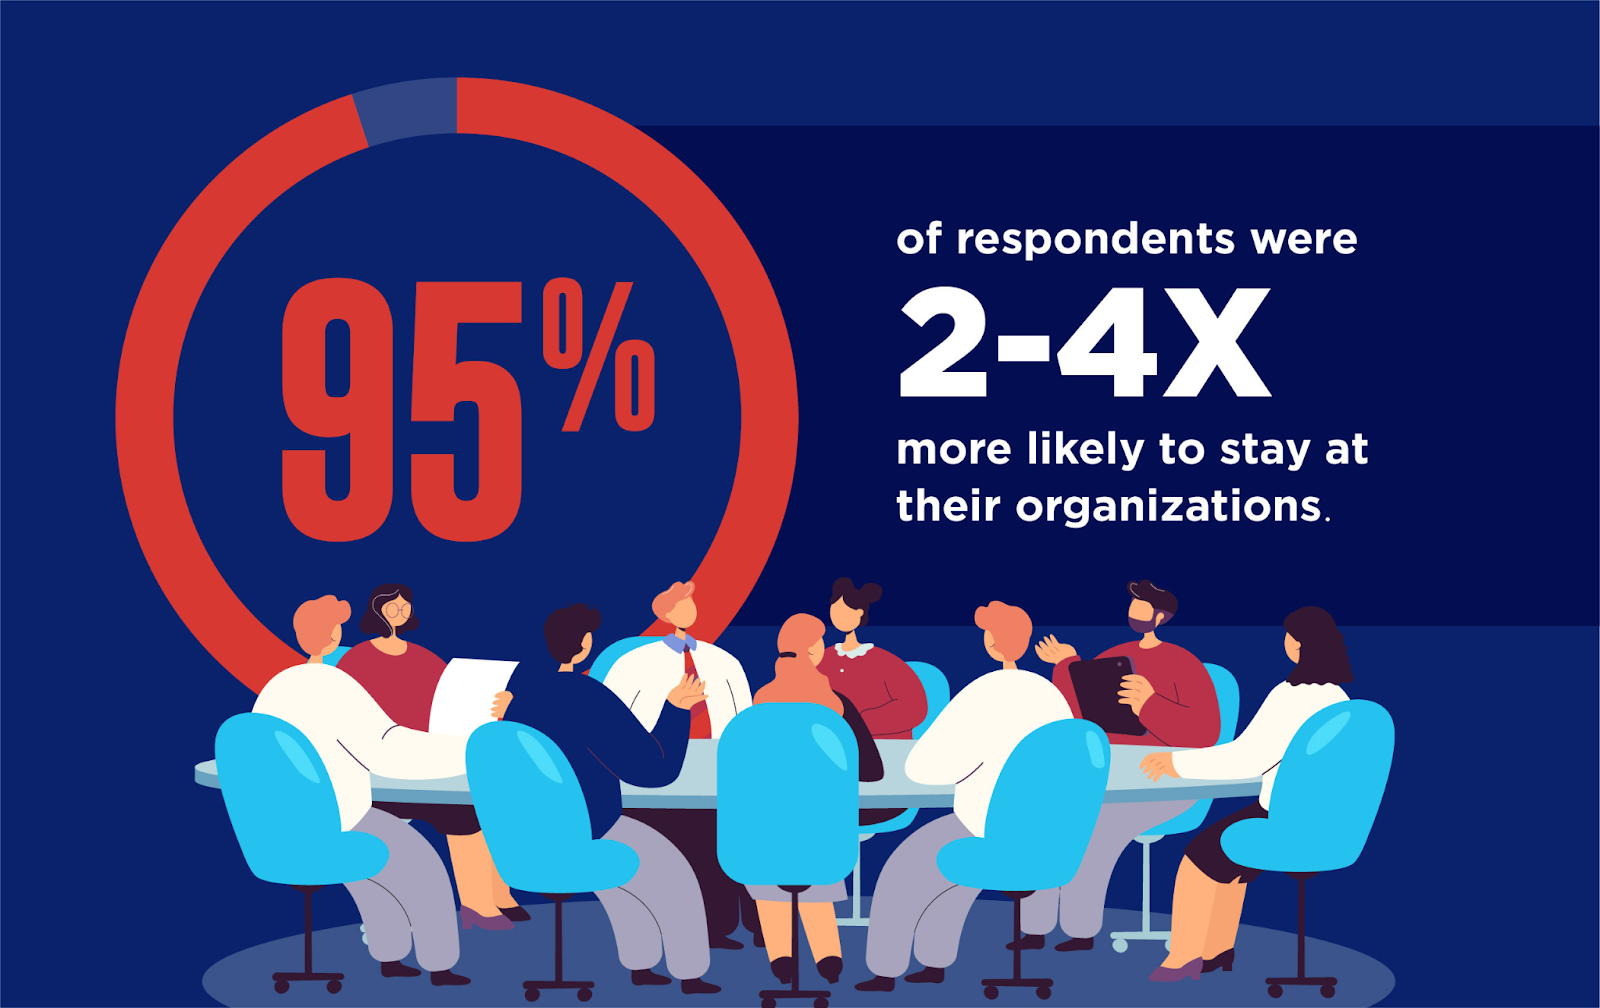 95% of respondents 2-4X more likely to stay at their organizations